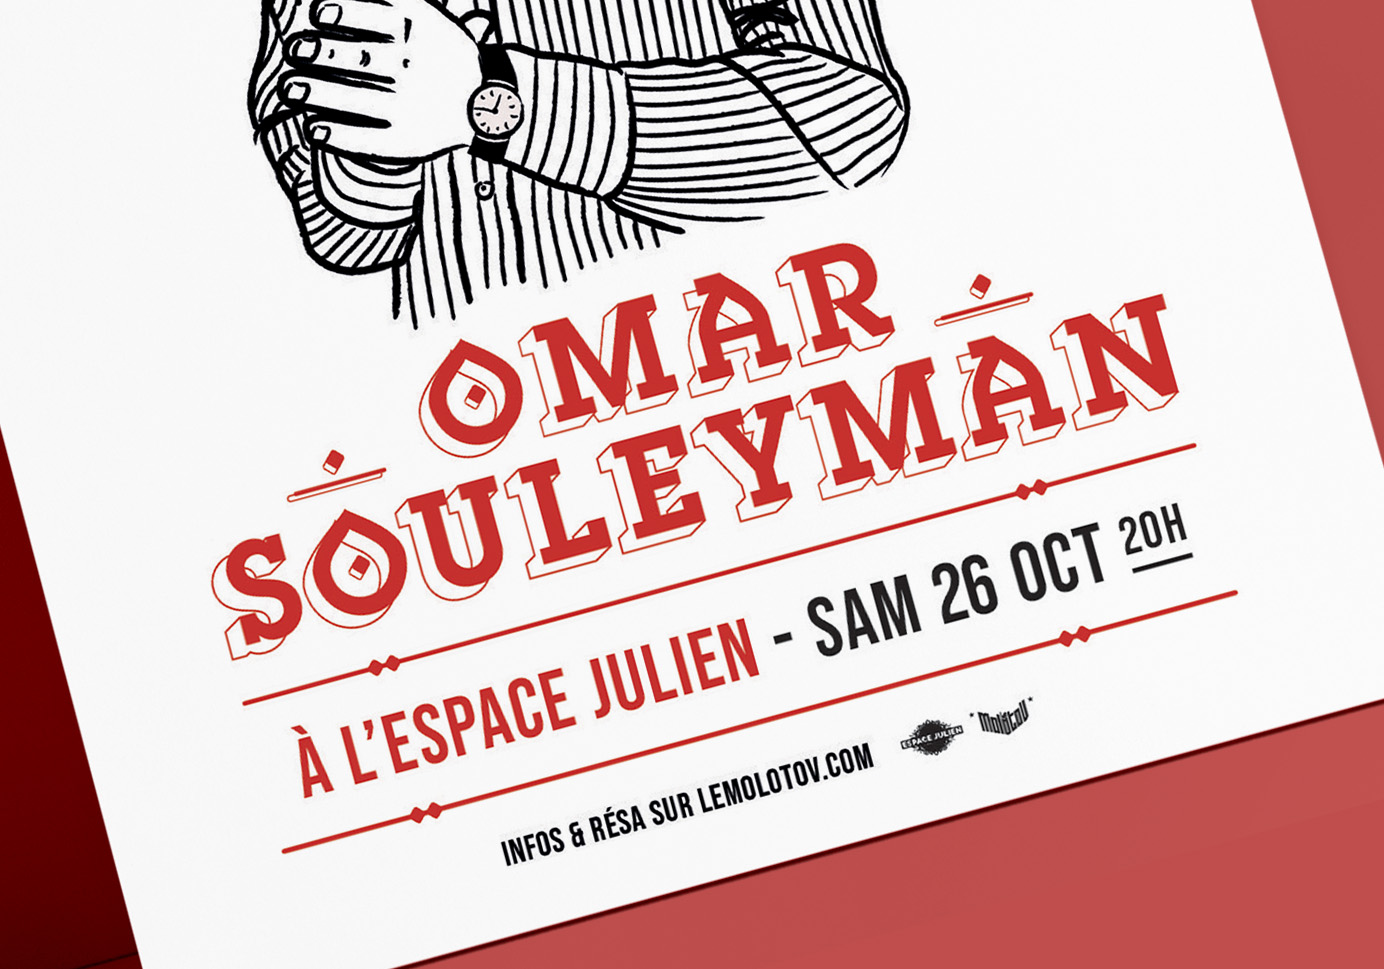 Oriental typographic work for Omar Souleyman poster